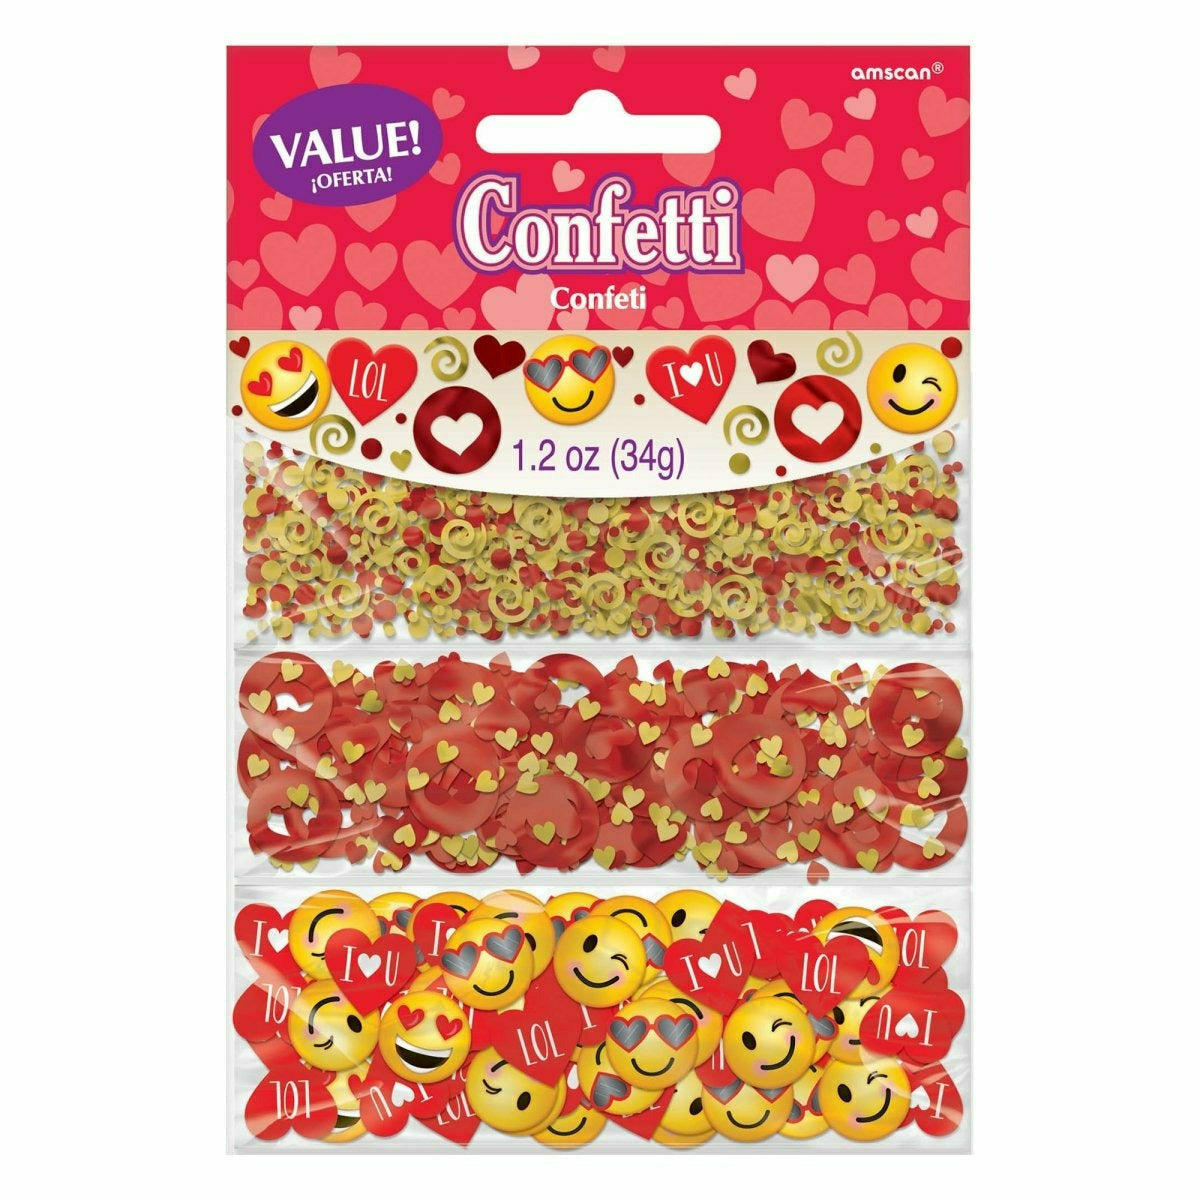 Amscan HOLIDAY: VALENTINES Heart & Smiley Confetti Valentine's Day